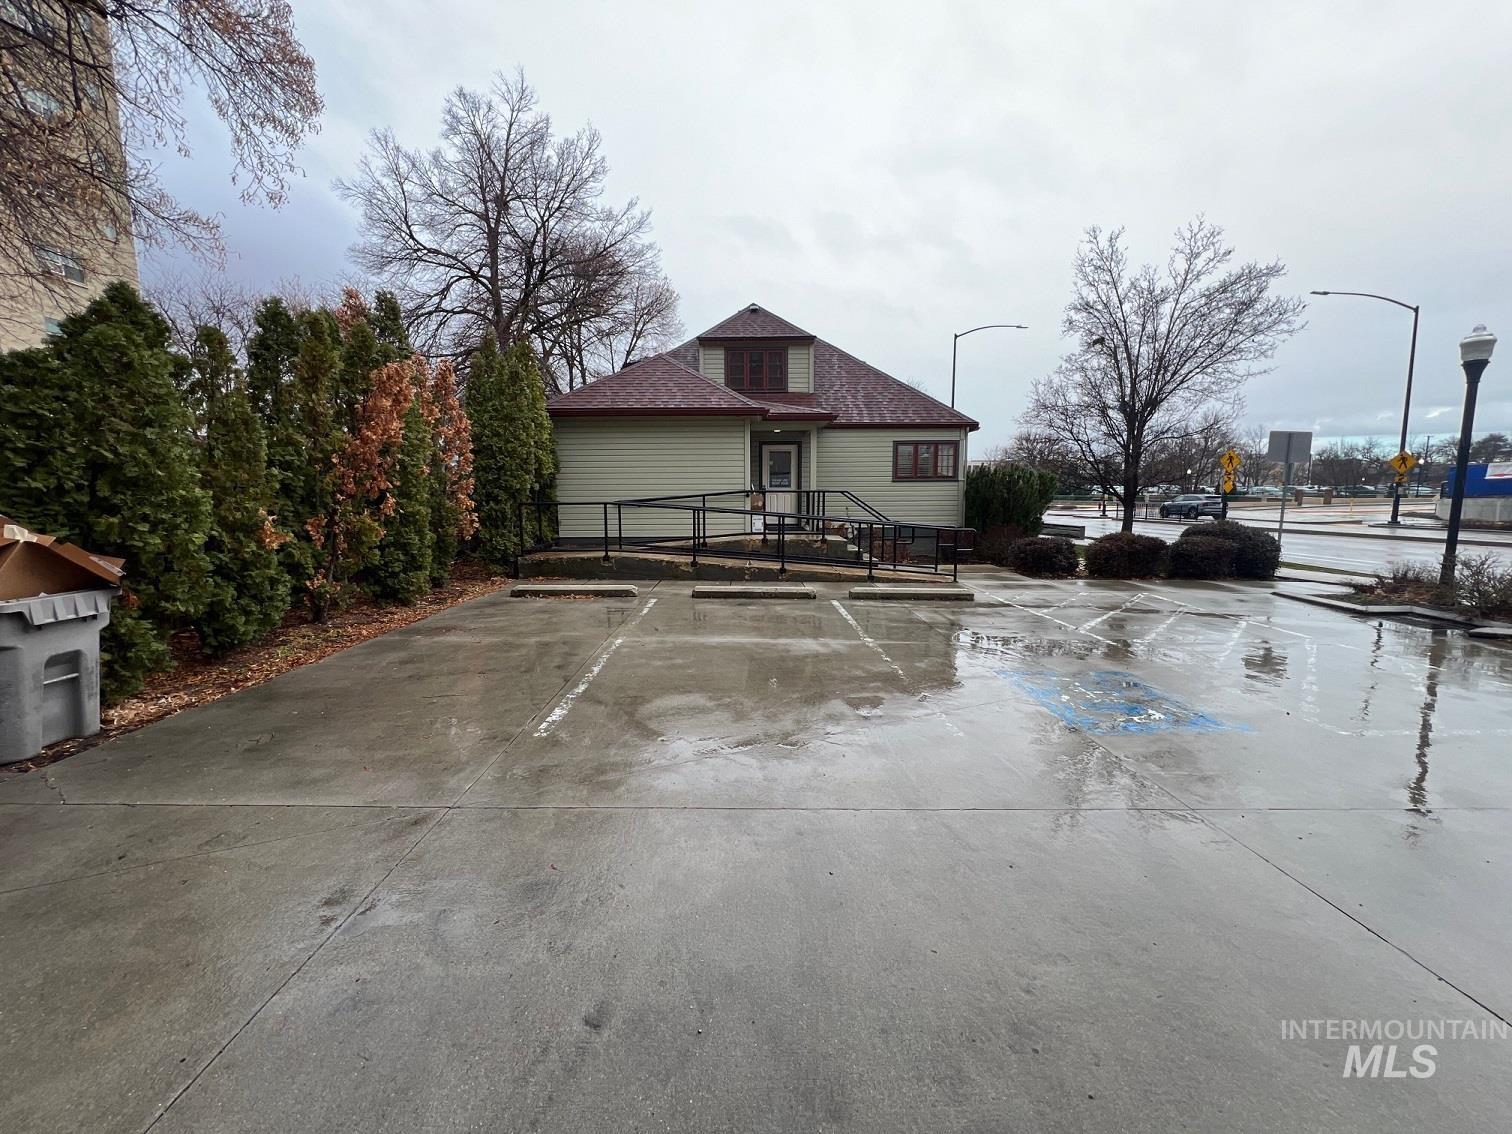 300 East Bannock, Boise, Idaho 83712-6207, Business/Commercial For Sale, Price $2,160,000,MLS 98903722